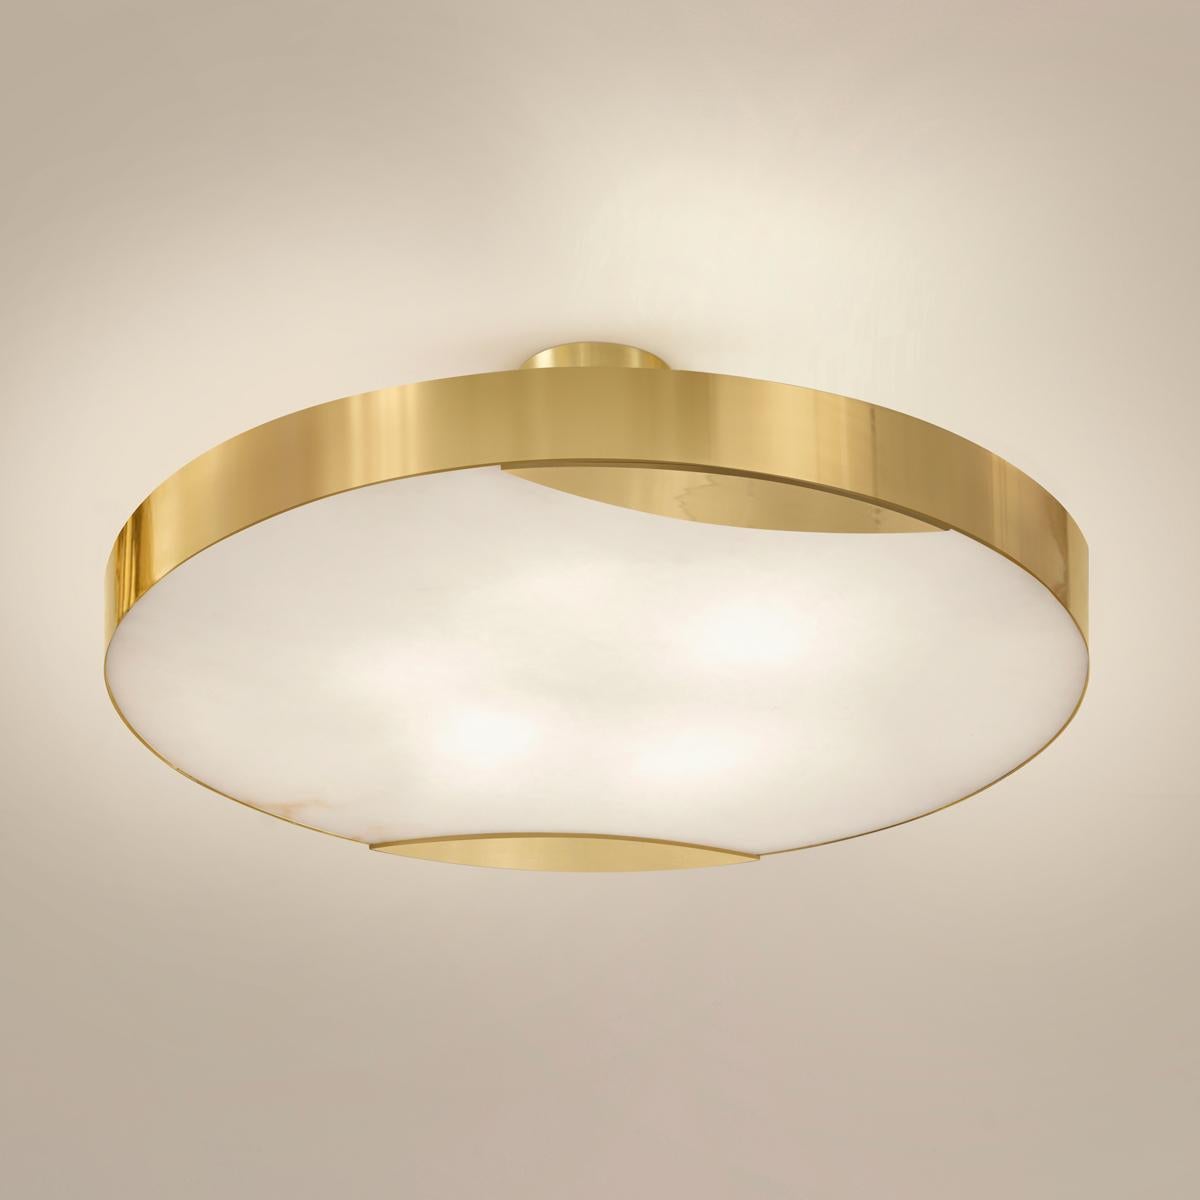 Brass Cloud N.1 Ceiling Light by Gaspare Asaro-Peltro Finish For Sale